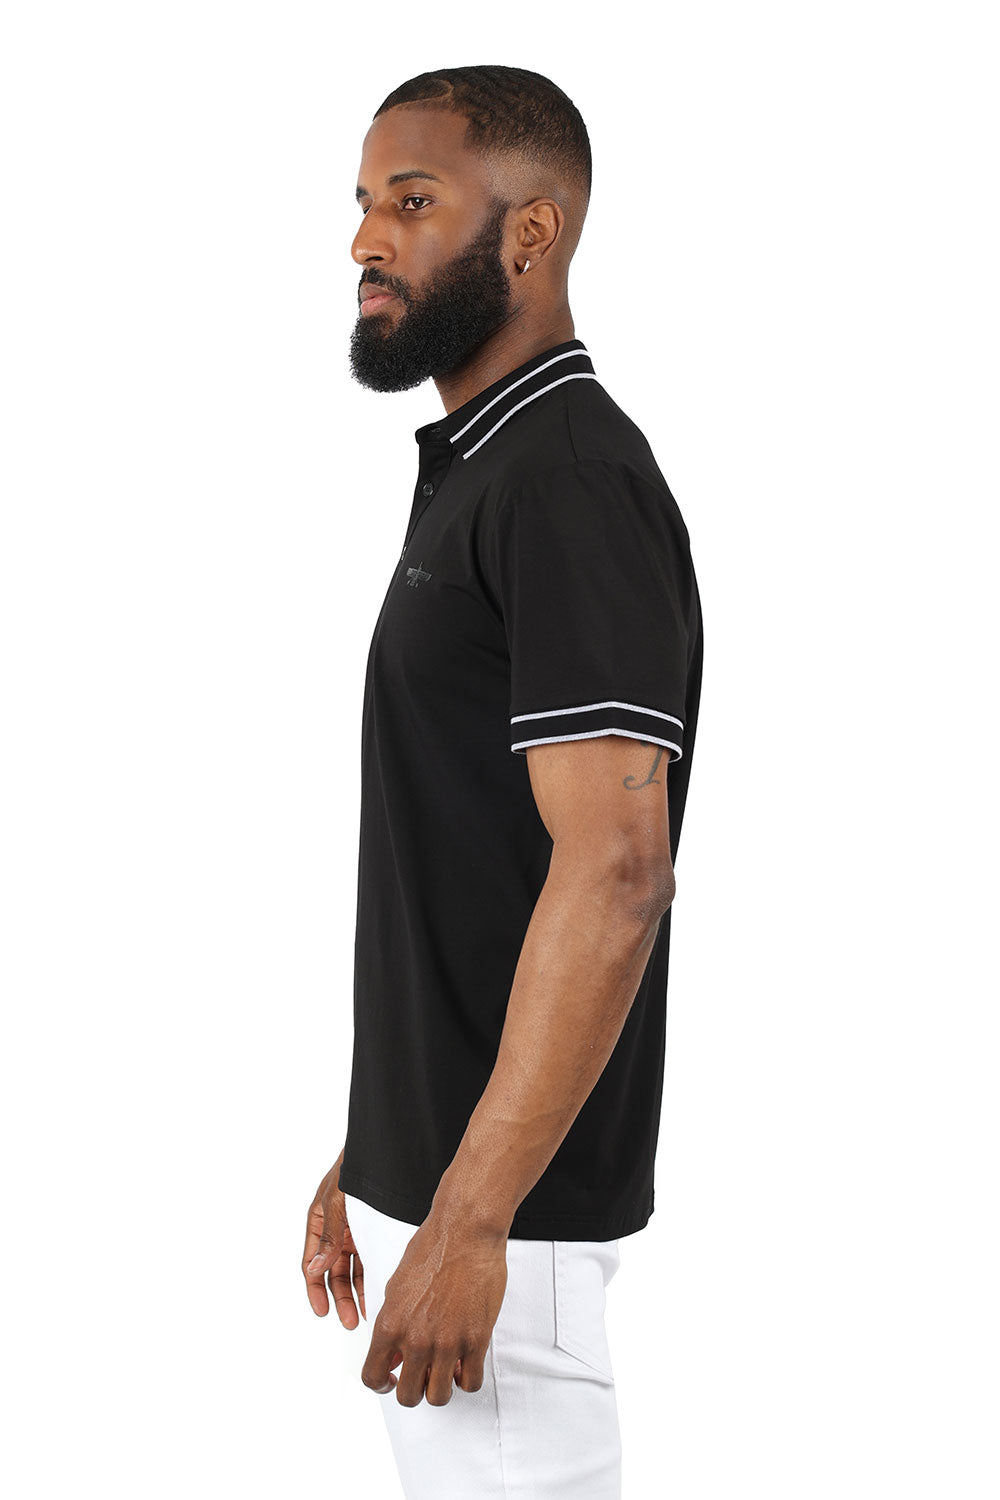 Barabas Men's Solid Color with Logo Polo Shirts 3PP832 Black Silver